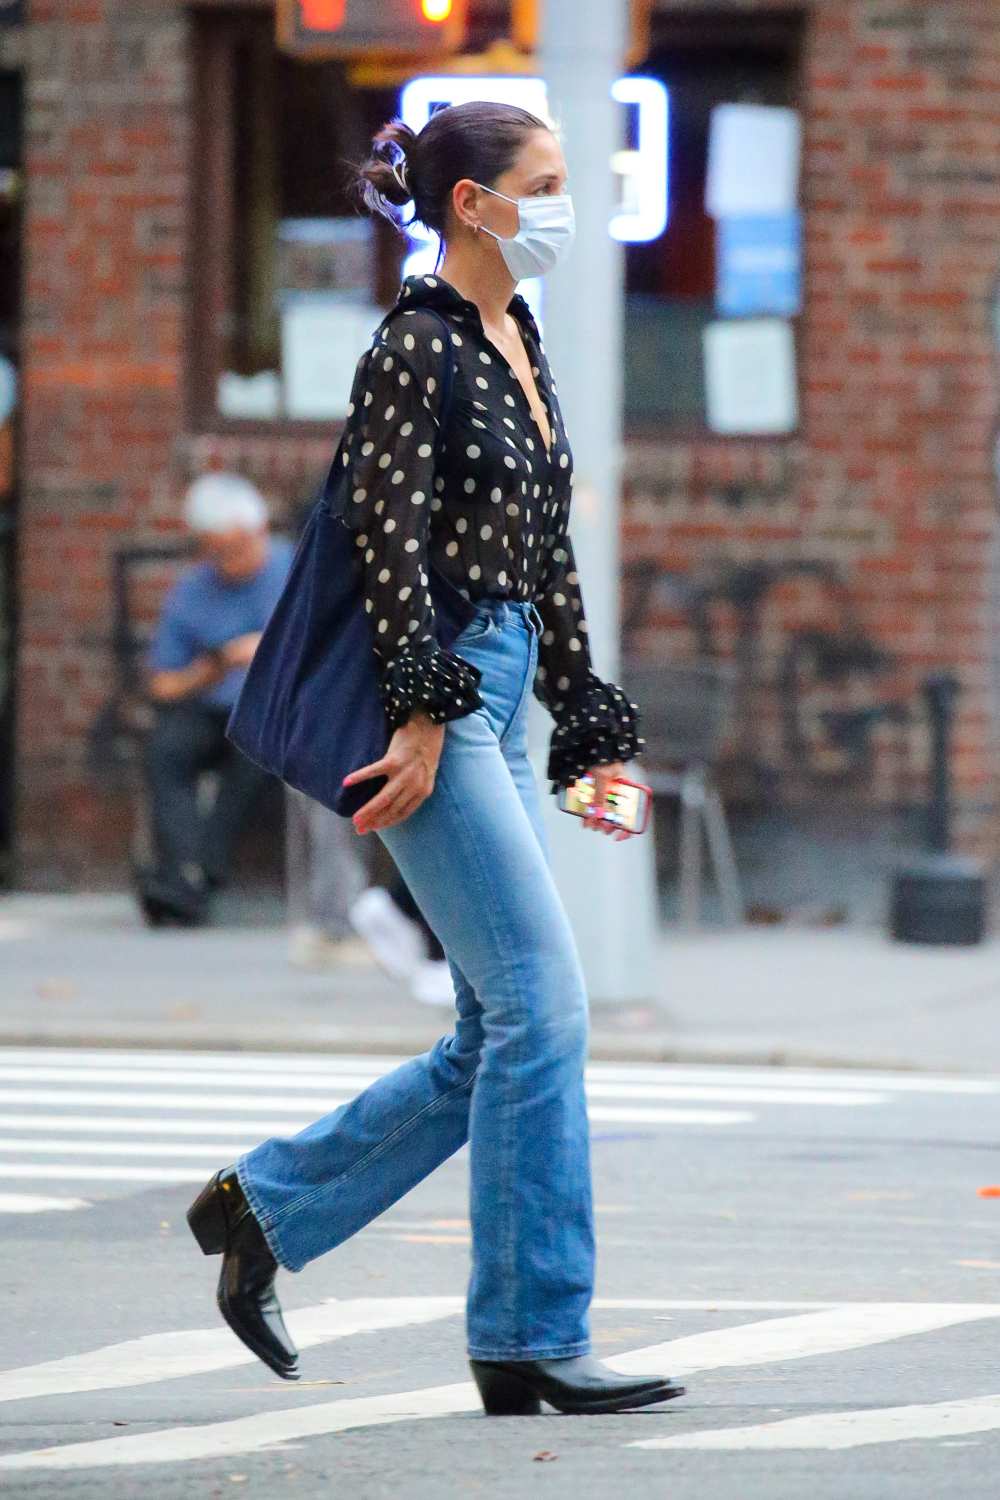 Katie Holmes walking to The Lucille Lortel Theatre in the West Village, NYC on September 22, 2021.